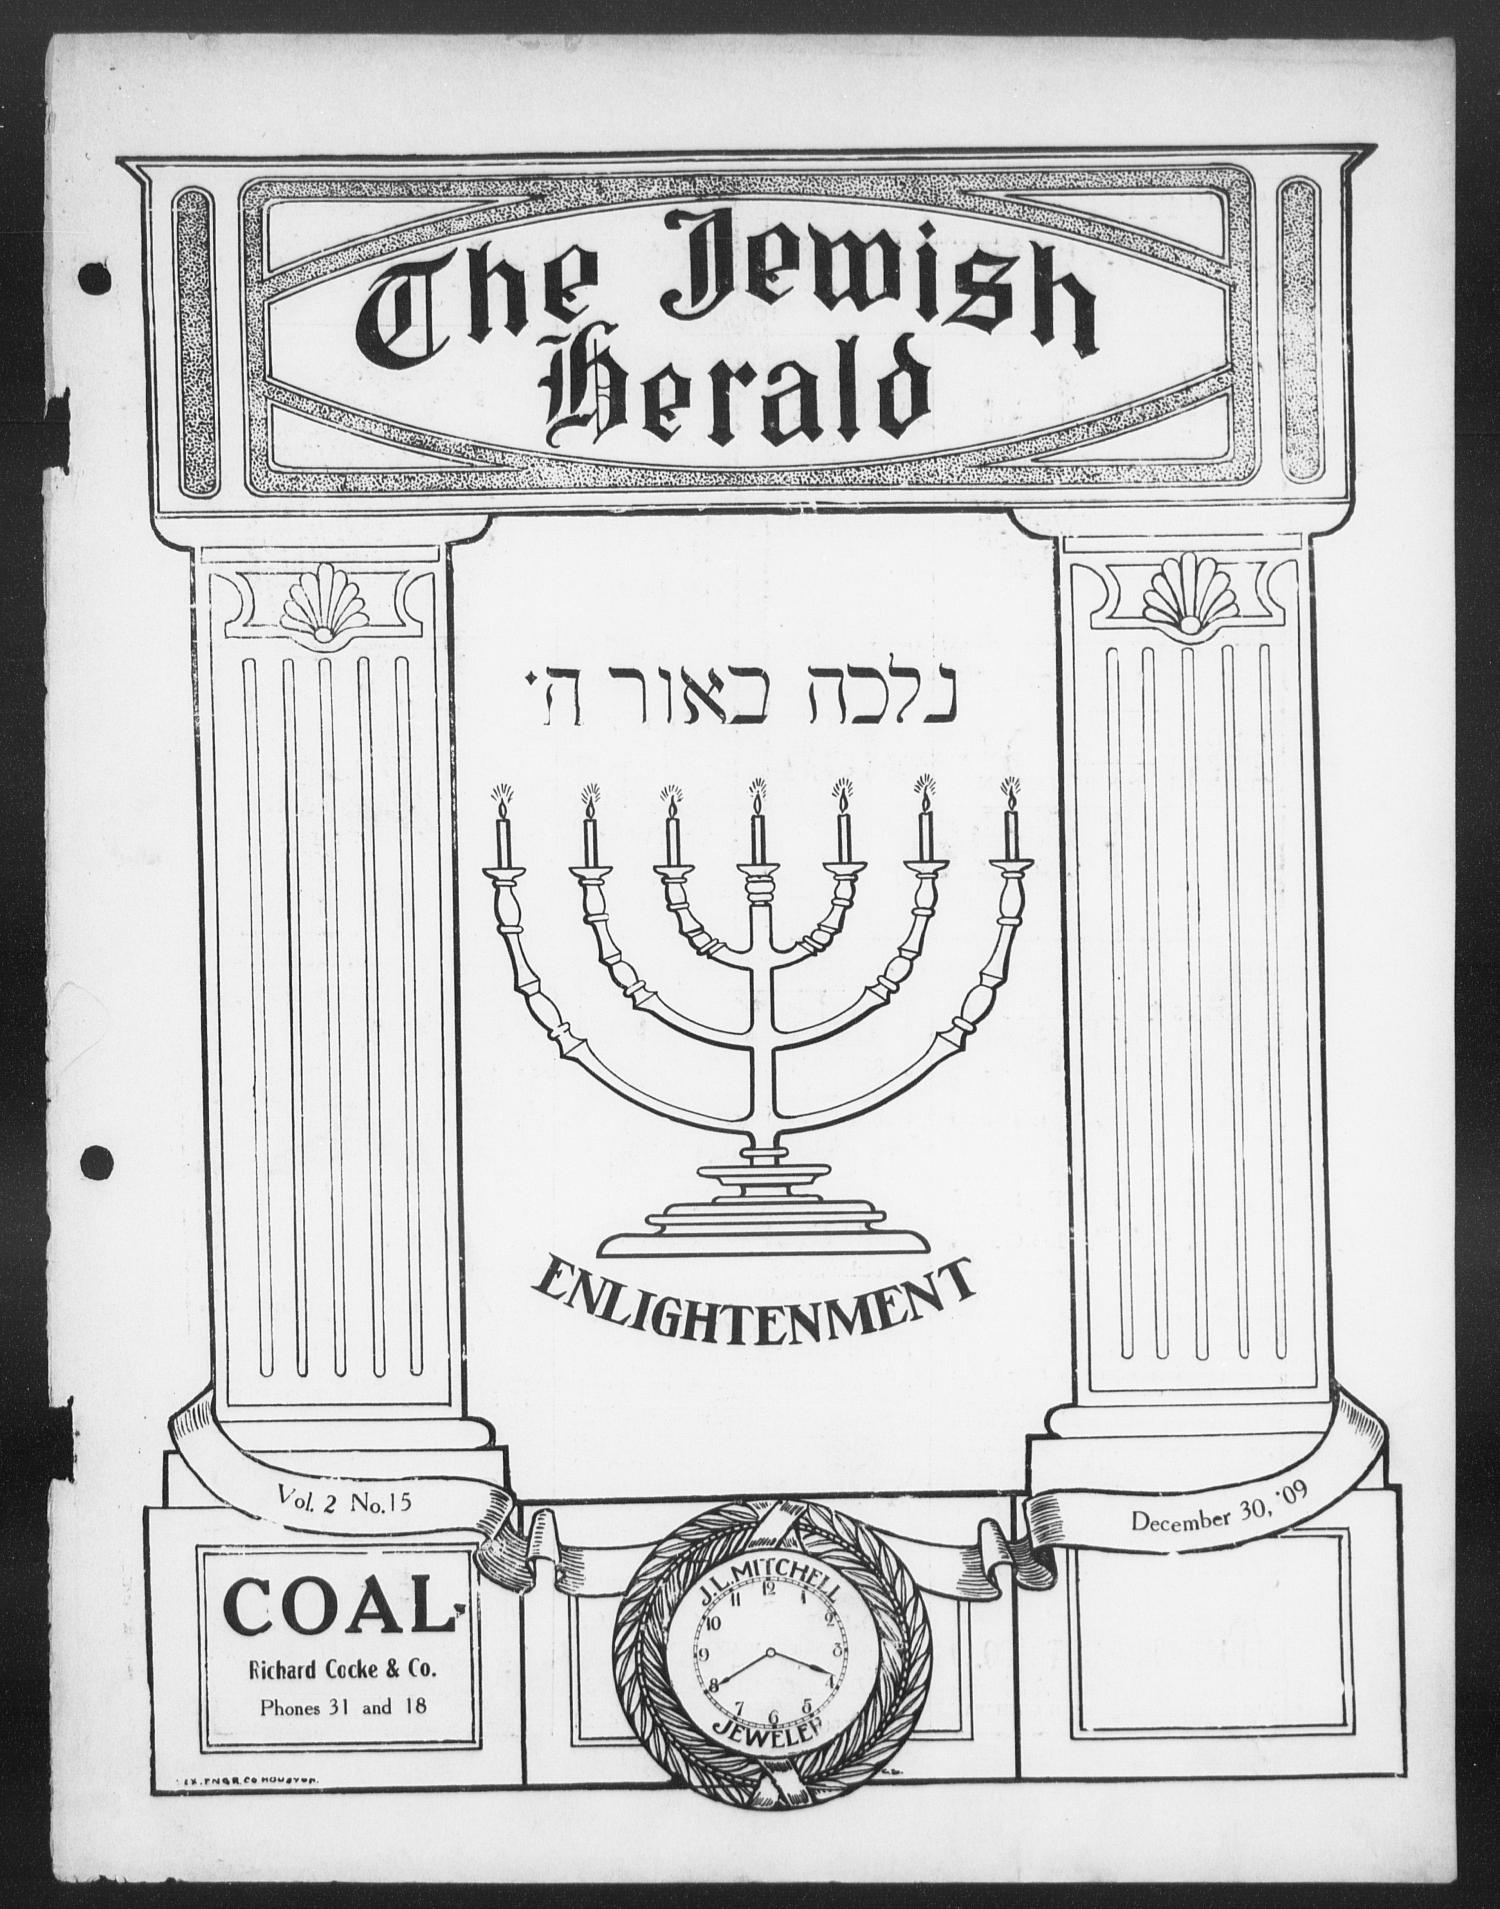 The Jewish Herald (Houston, Tex.), Vol. 2, No. 15, Ed. 1, Thursday, December 30, 1909
                                                
                                                    [Sequence #]: 1 of 28
                                                